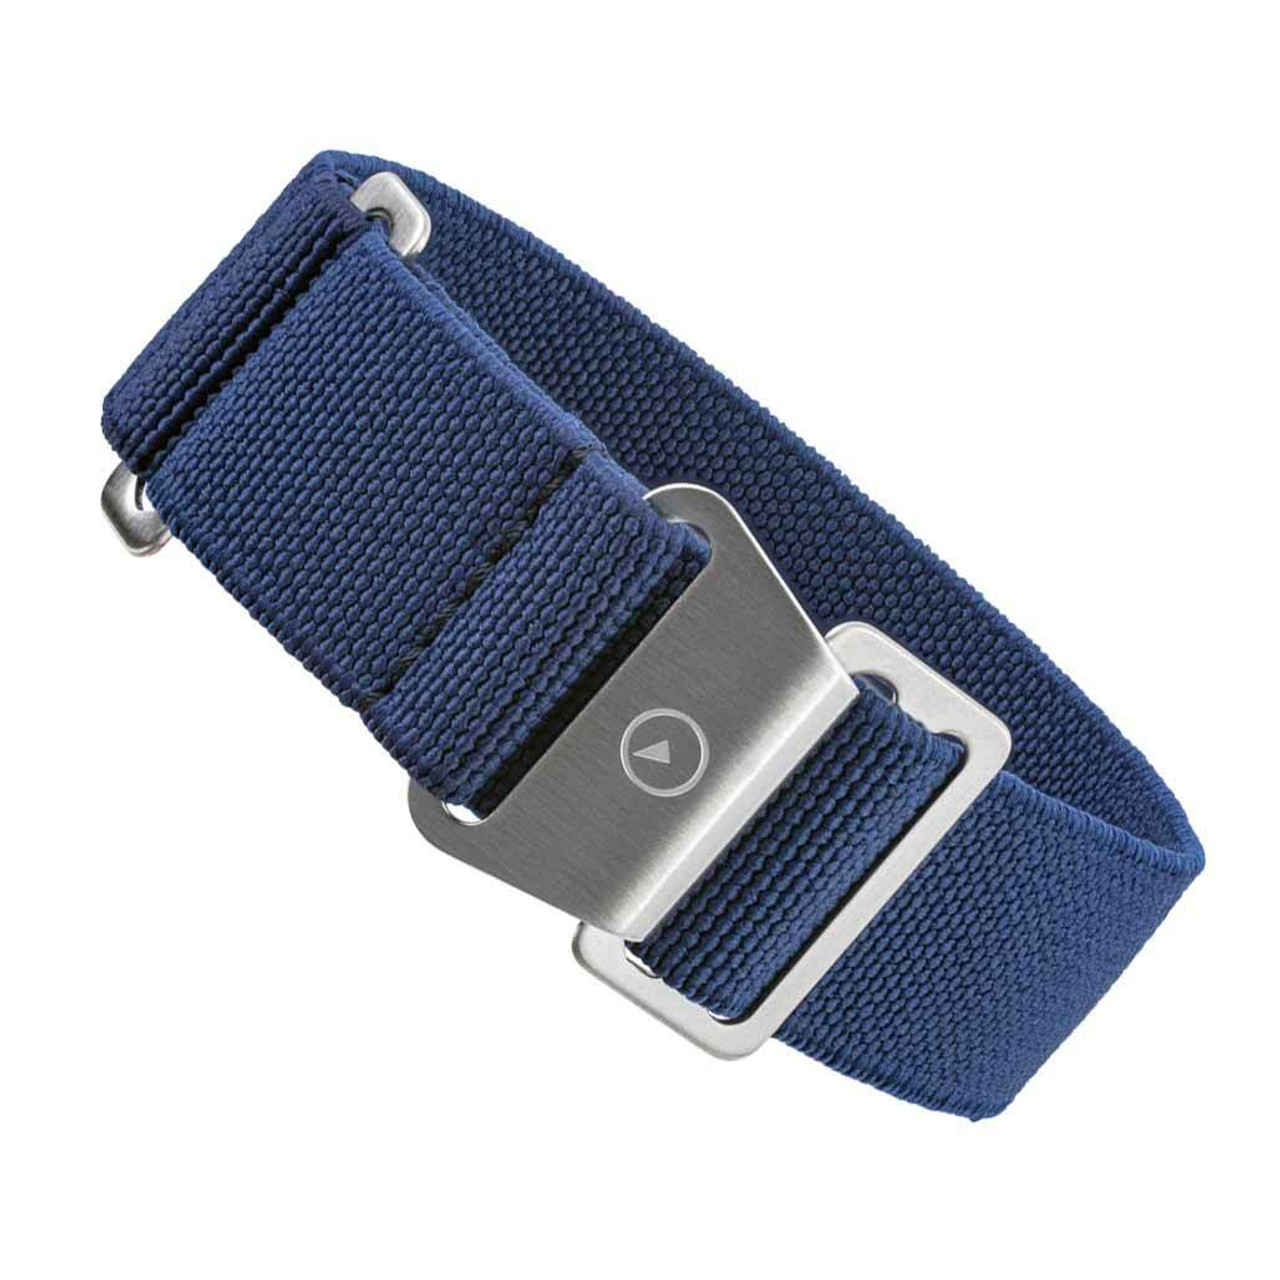 Black Elastic Woven Nylon Strap with Grey Stripes, Brushed Finish Steel  Clasp #EWB-12-SS